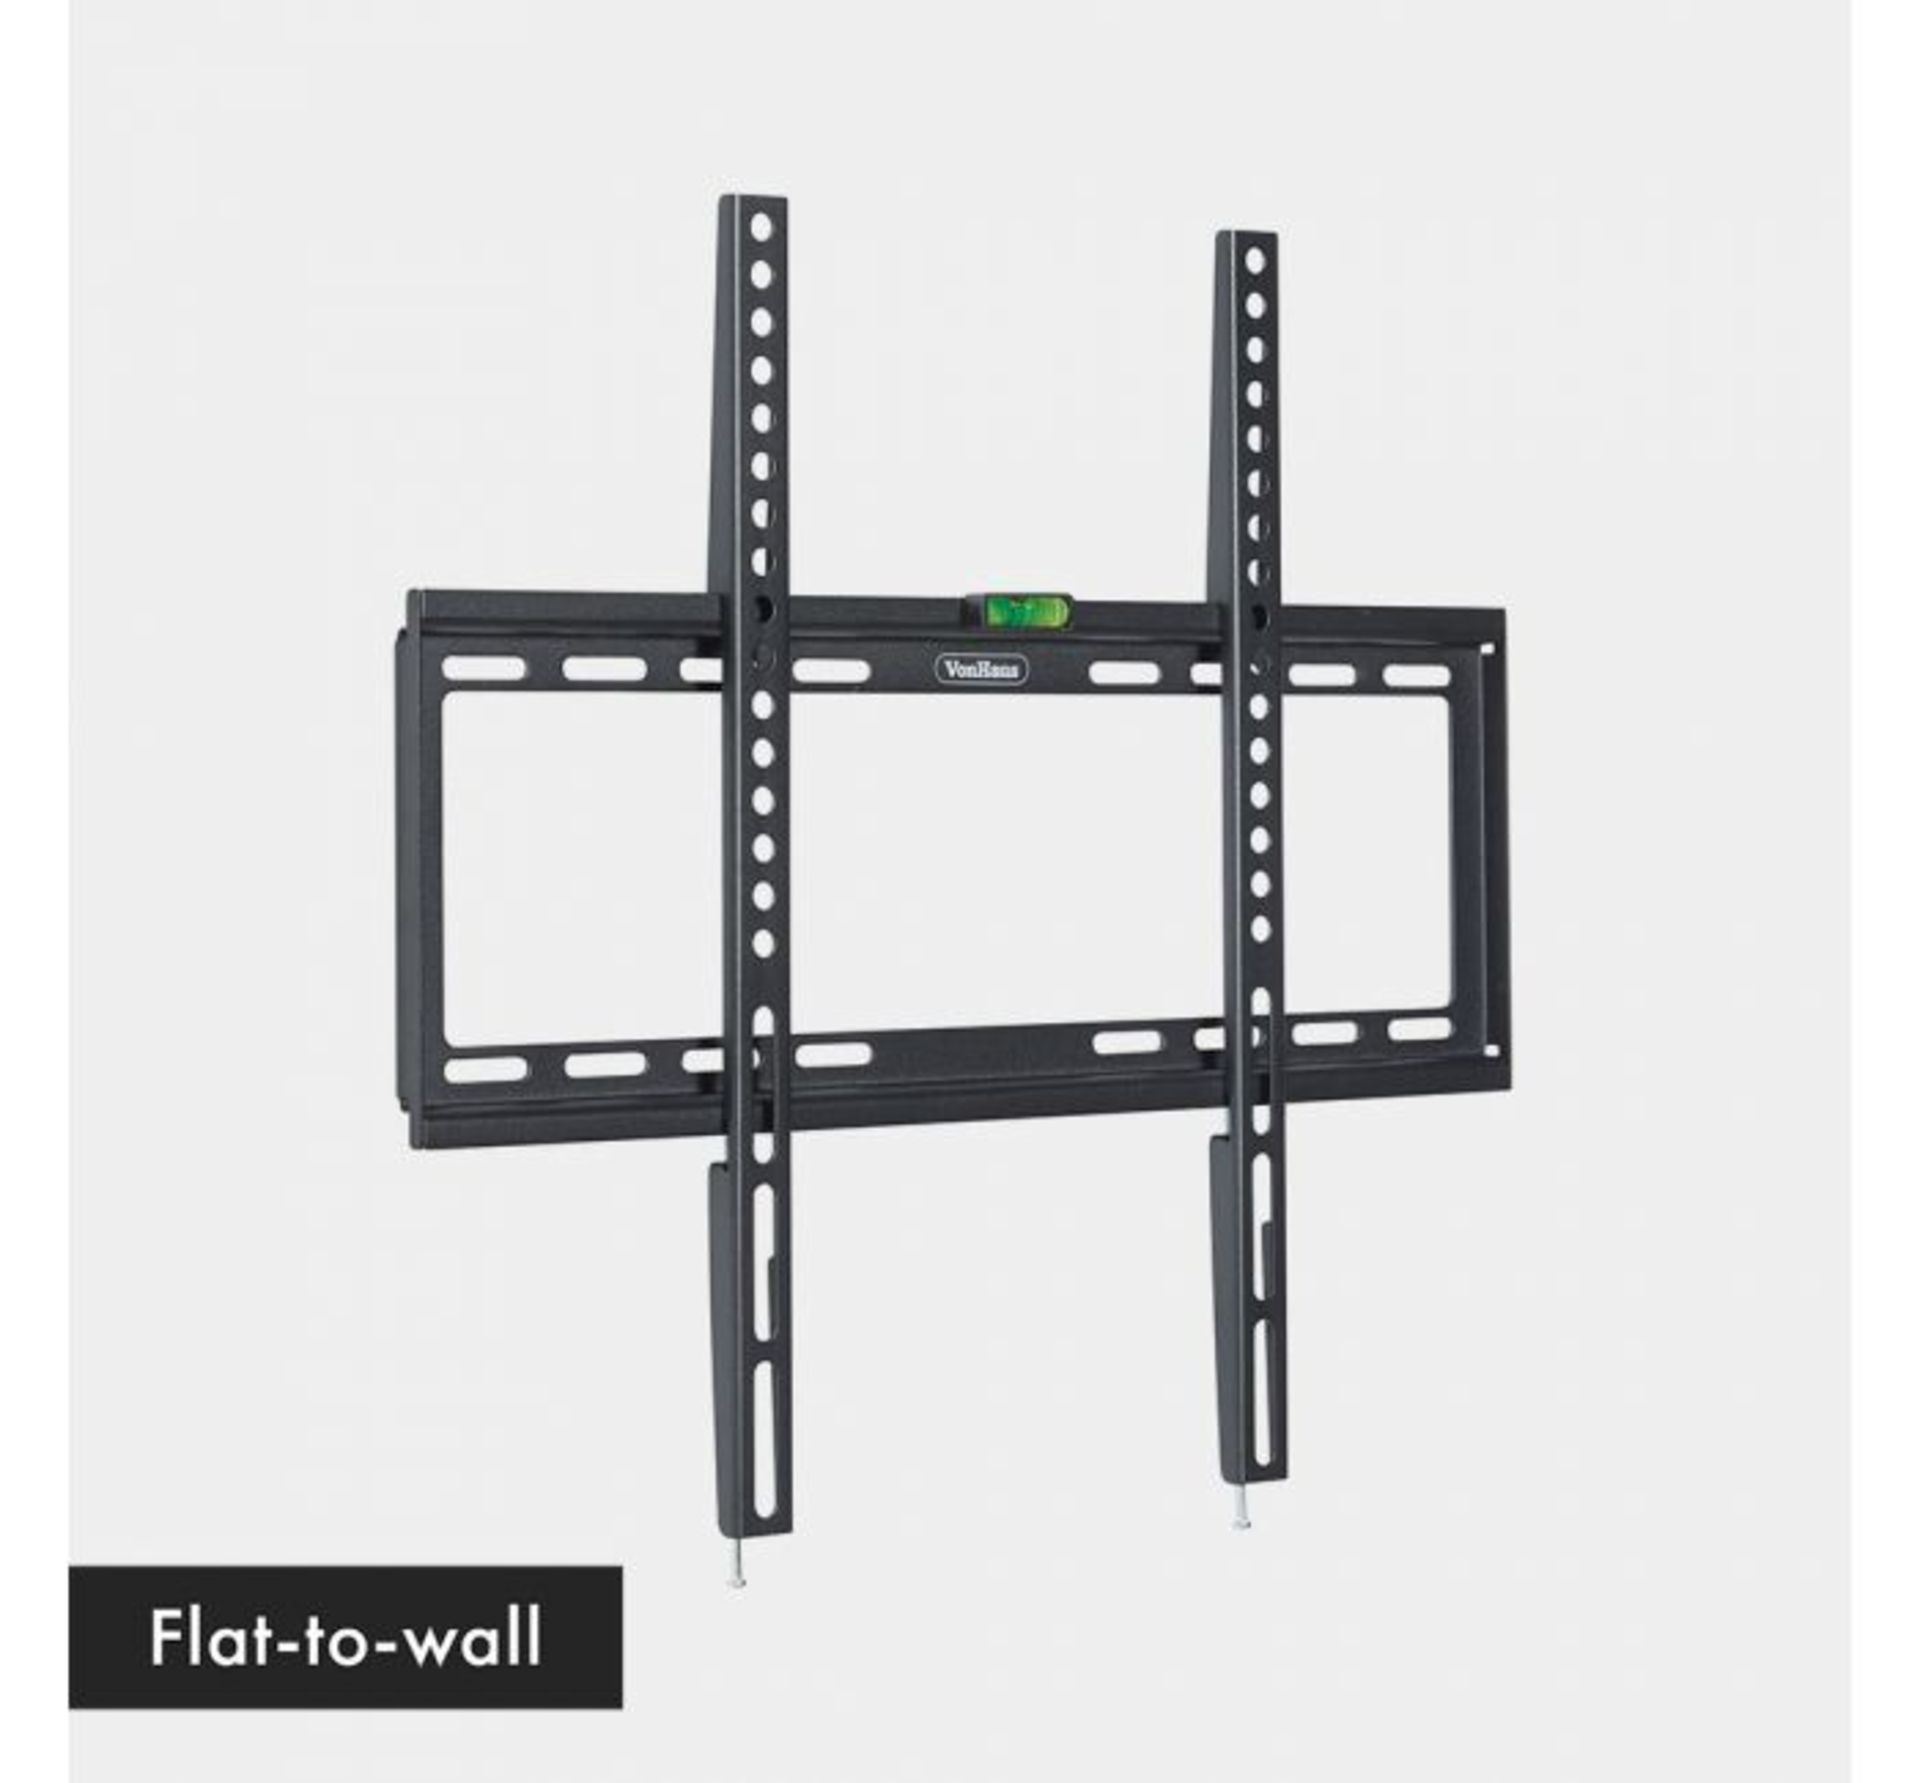 (OM124) 32-55 inch Flat-to-wall TV bracket Please confirm your TV’s VESA Mounting Dimensions... - Image 2 of 2